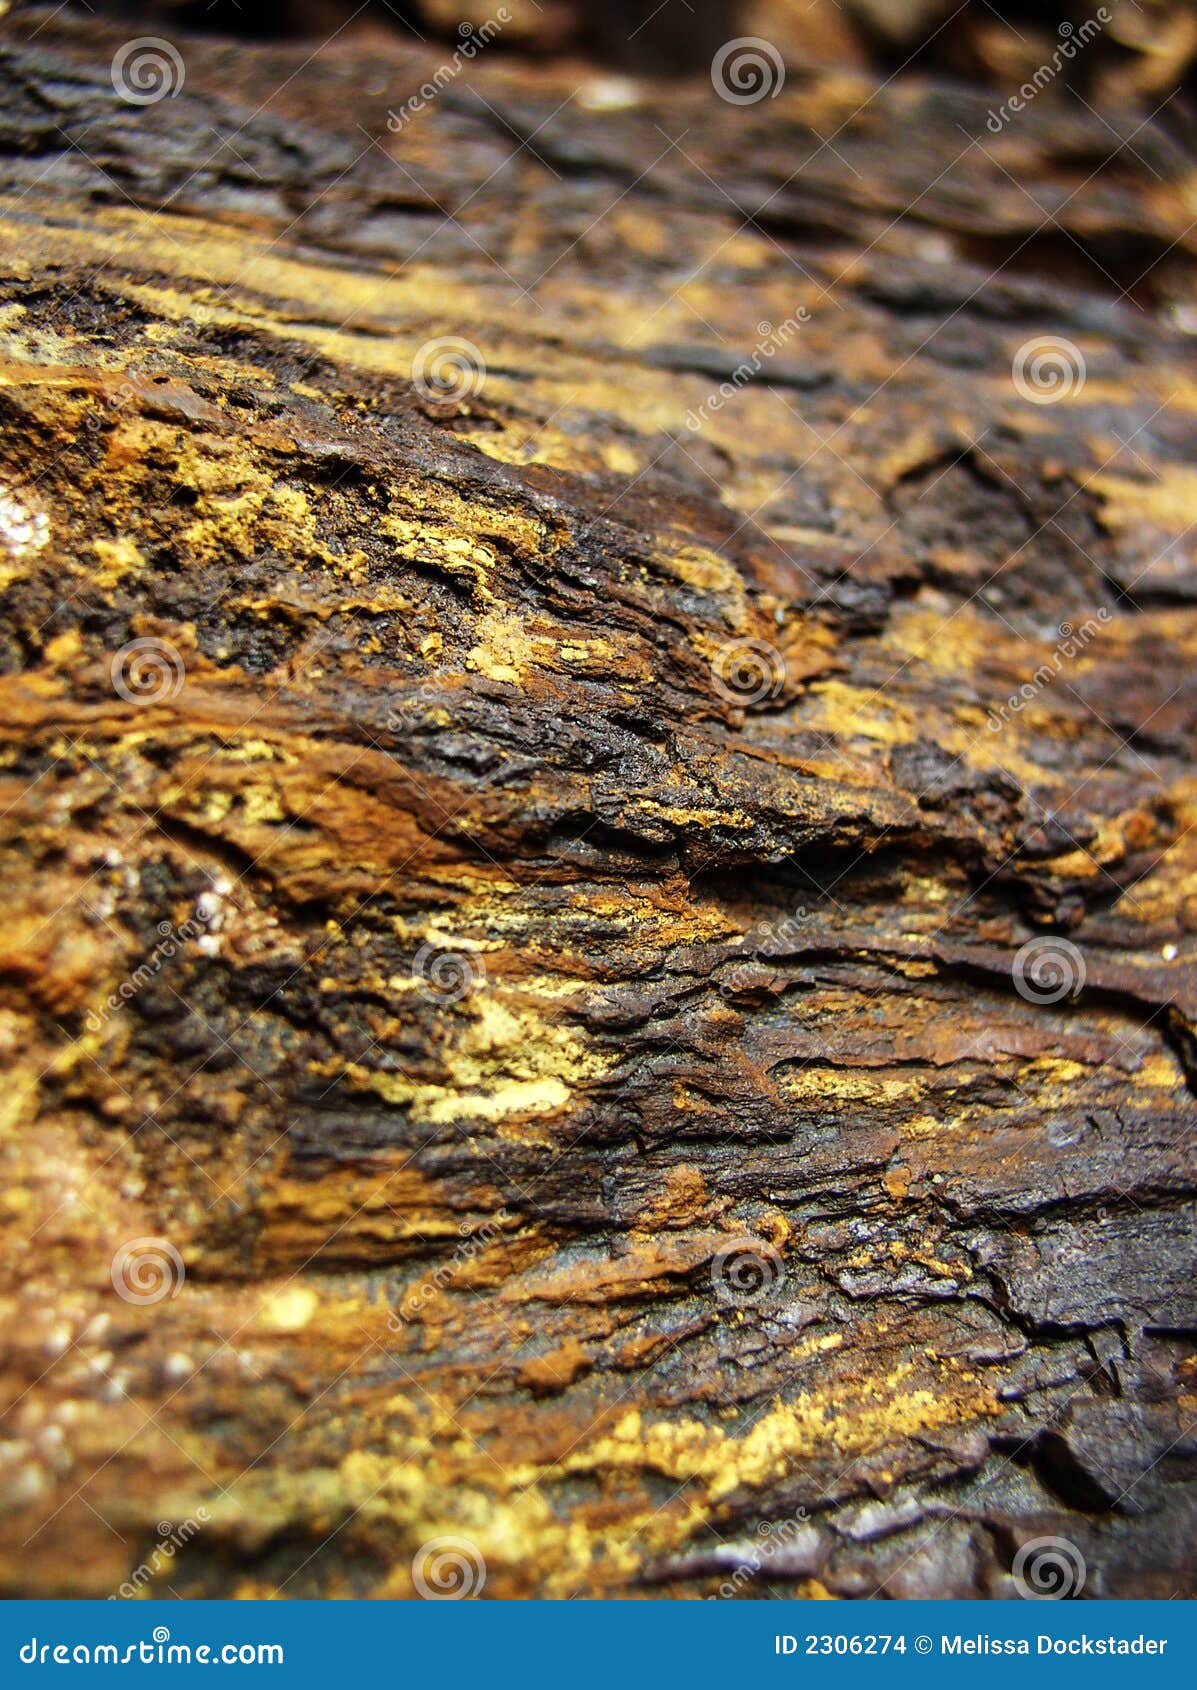 Can Gold Be Found in Petrified Wood 